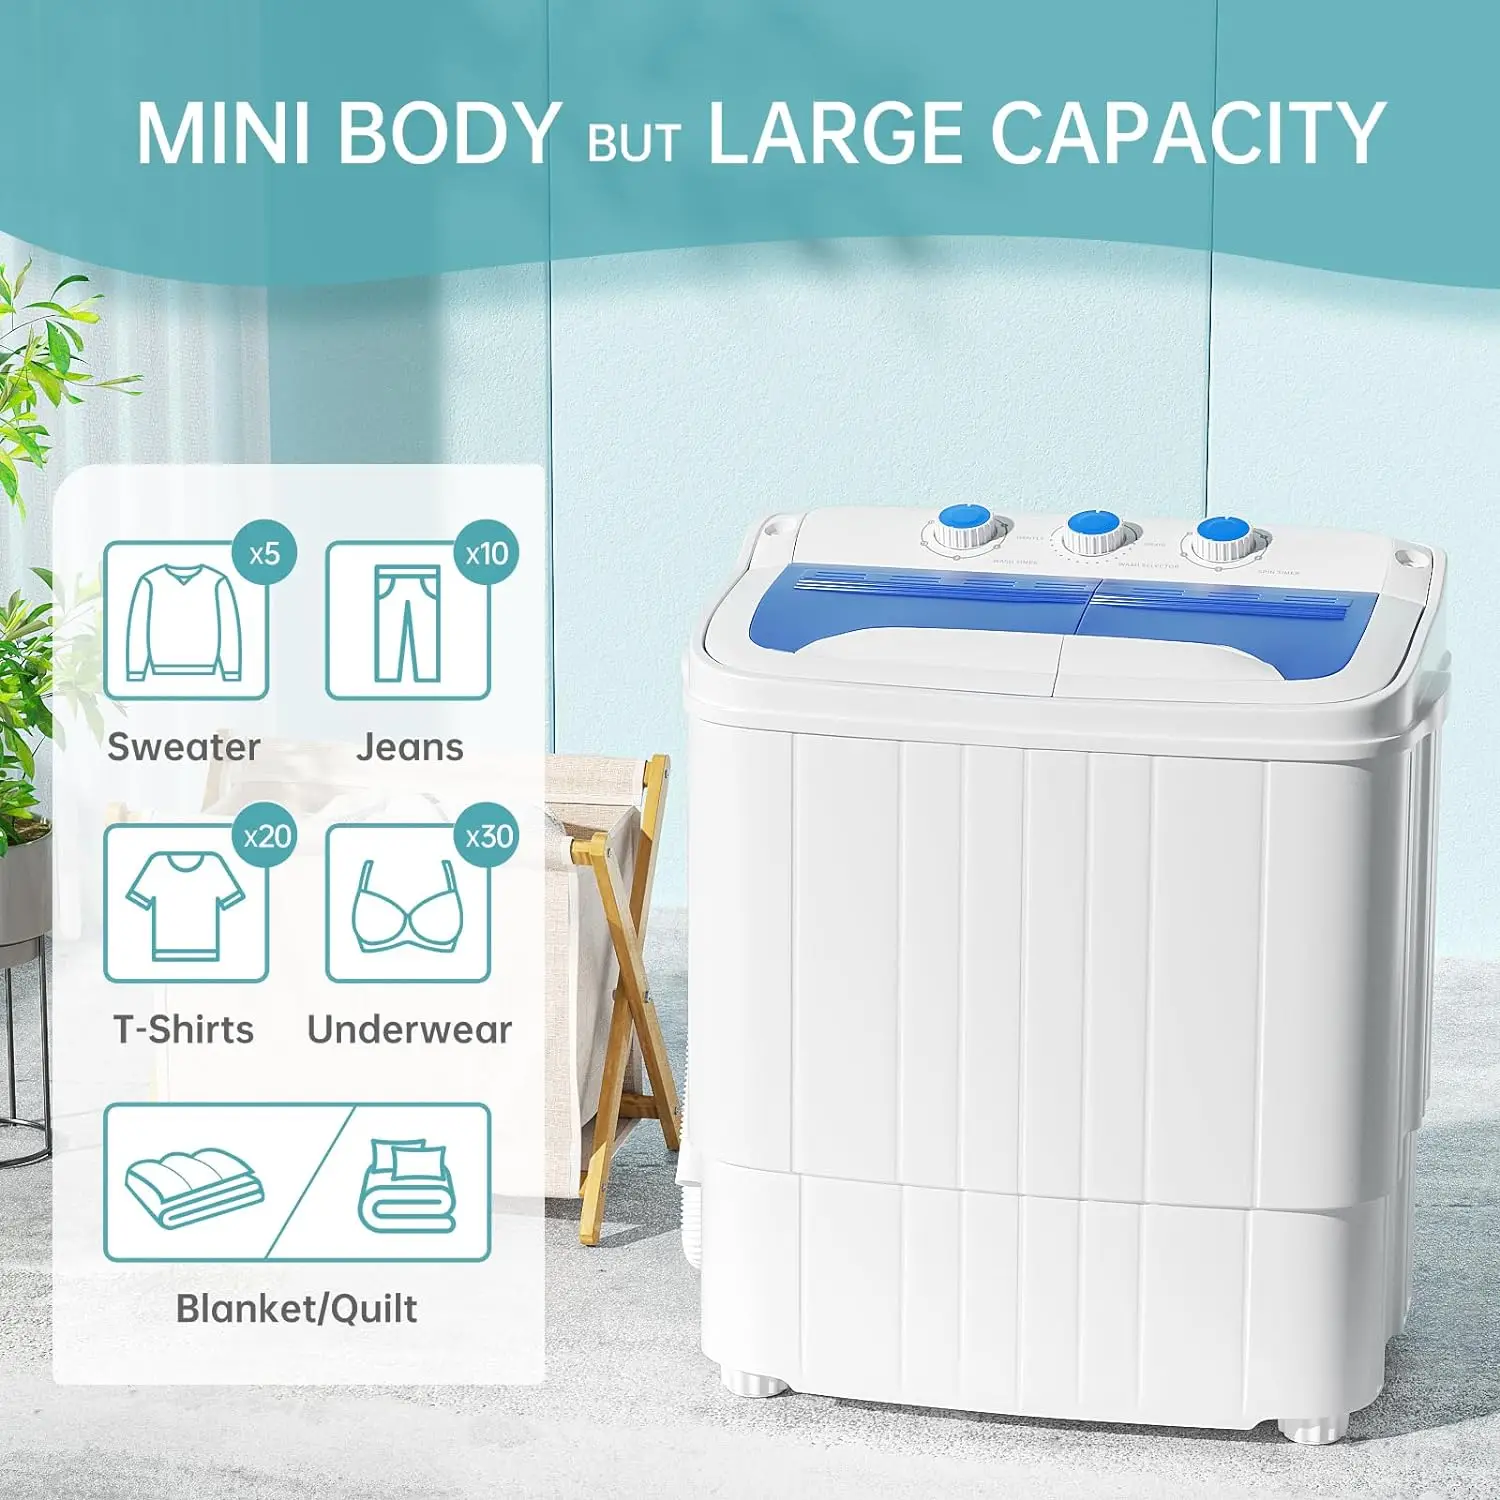 INTERGREAT Portable Waher and Dryer, 14.5 lbs Mini Small Washing Machine Combo with Spin Dryer, Compact Twin Tub Laundry Washer